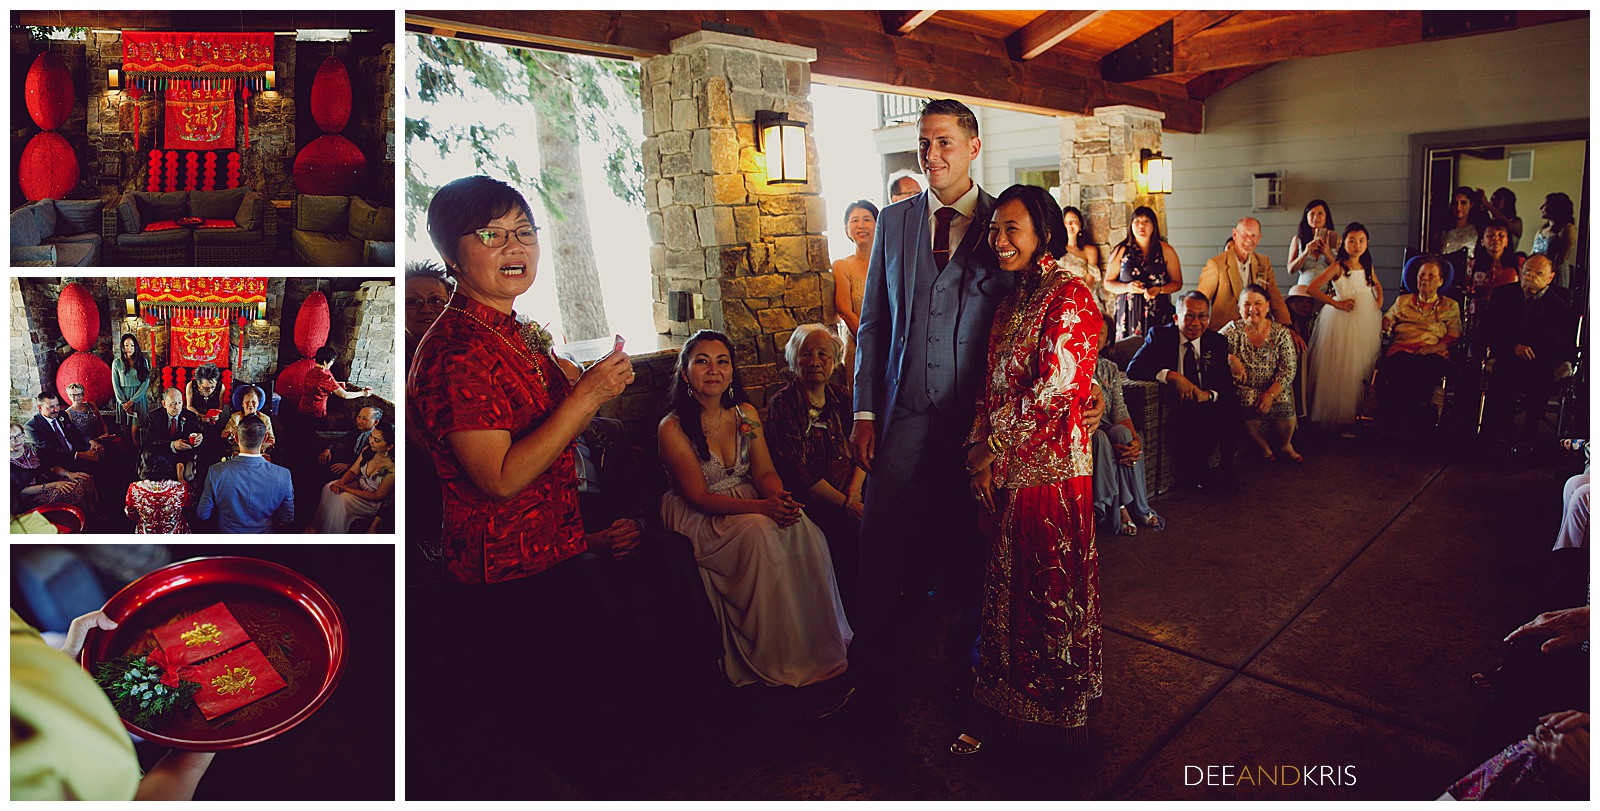 Dee and Kris photography, Chinese tea ceremony at their Shadow Mountain Resort. Wedding Tea ceremony, red Chinese wedding dress